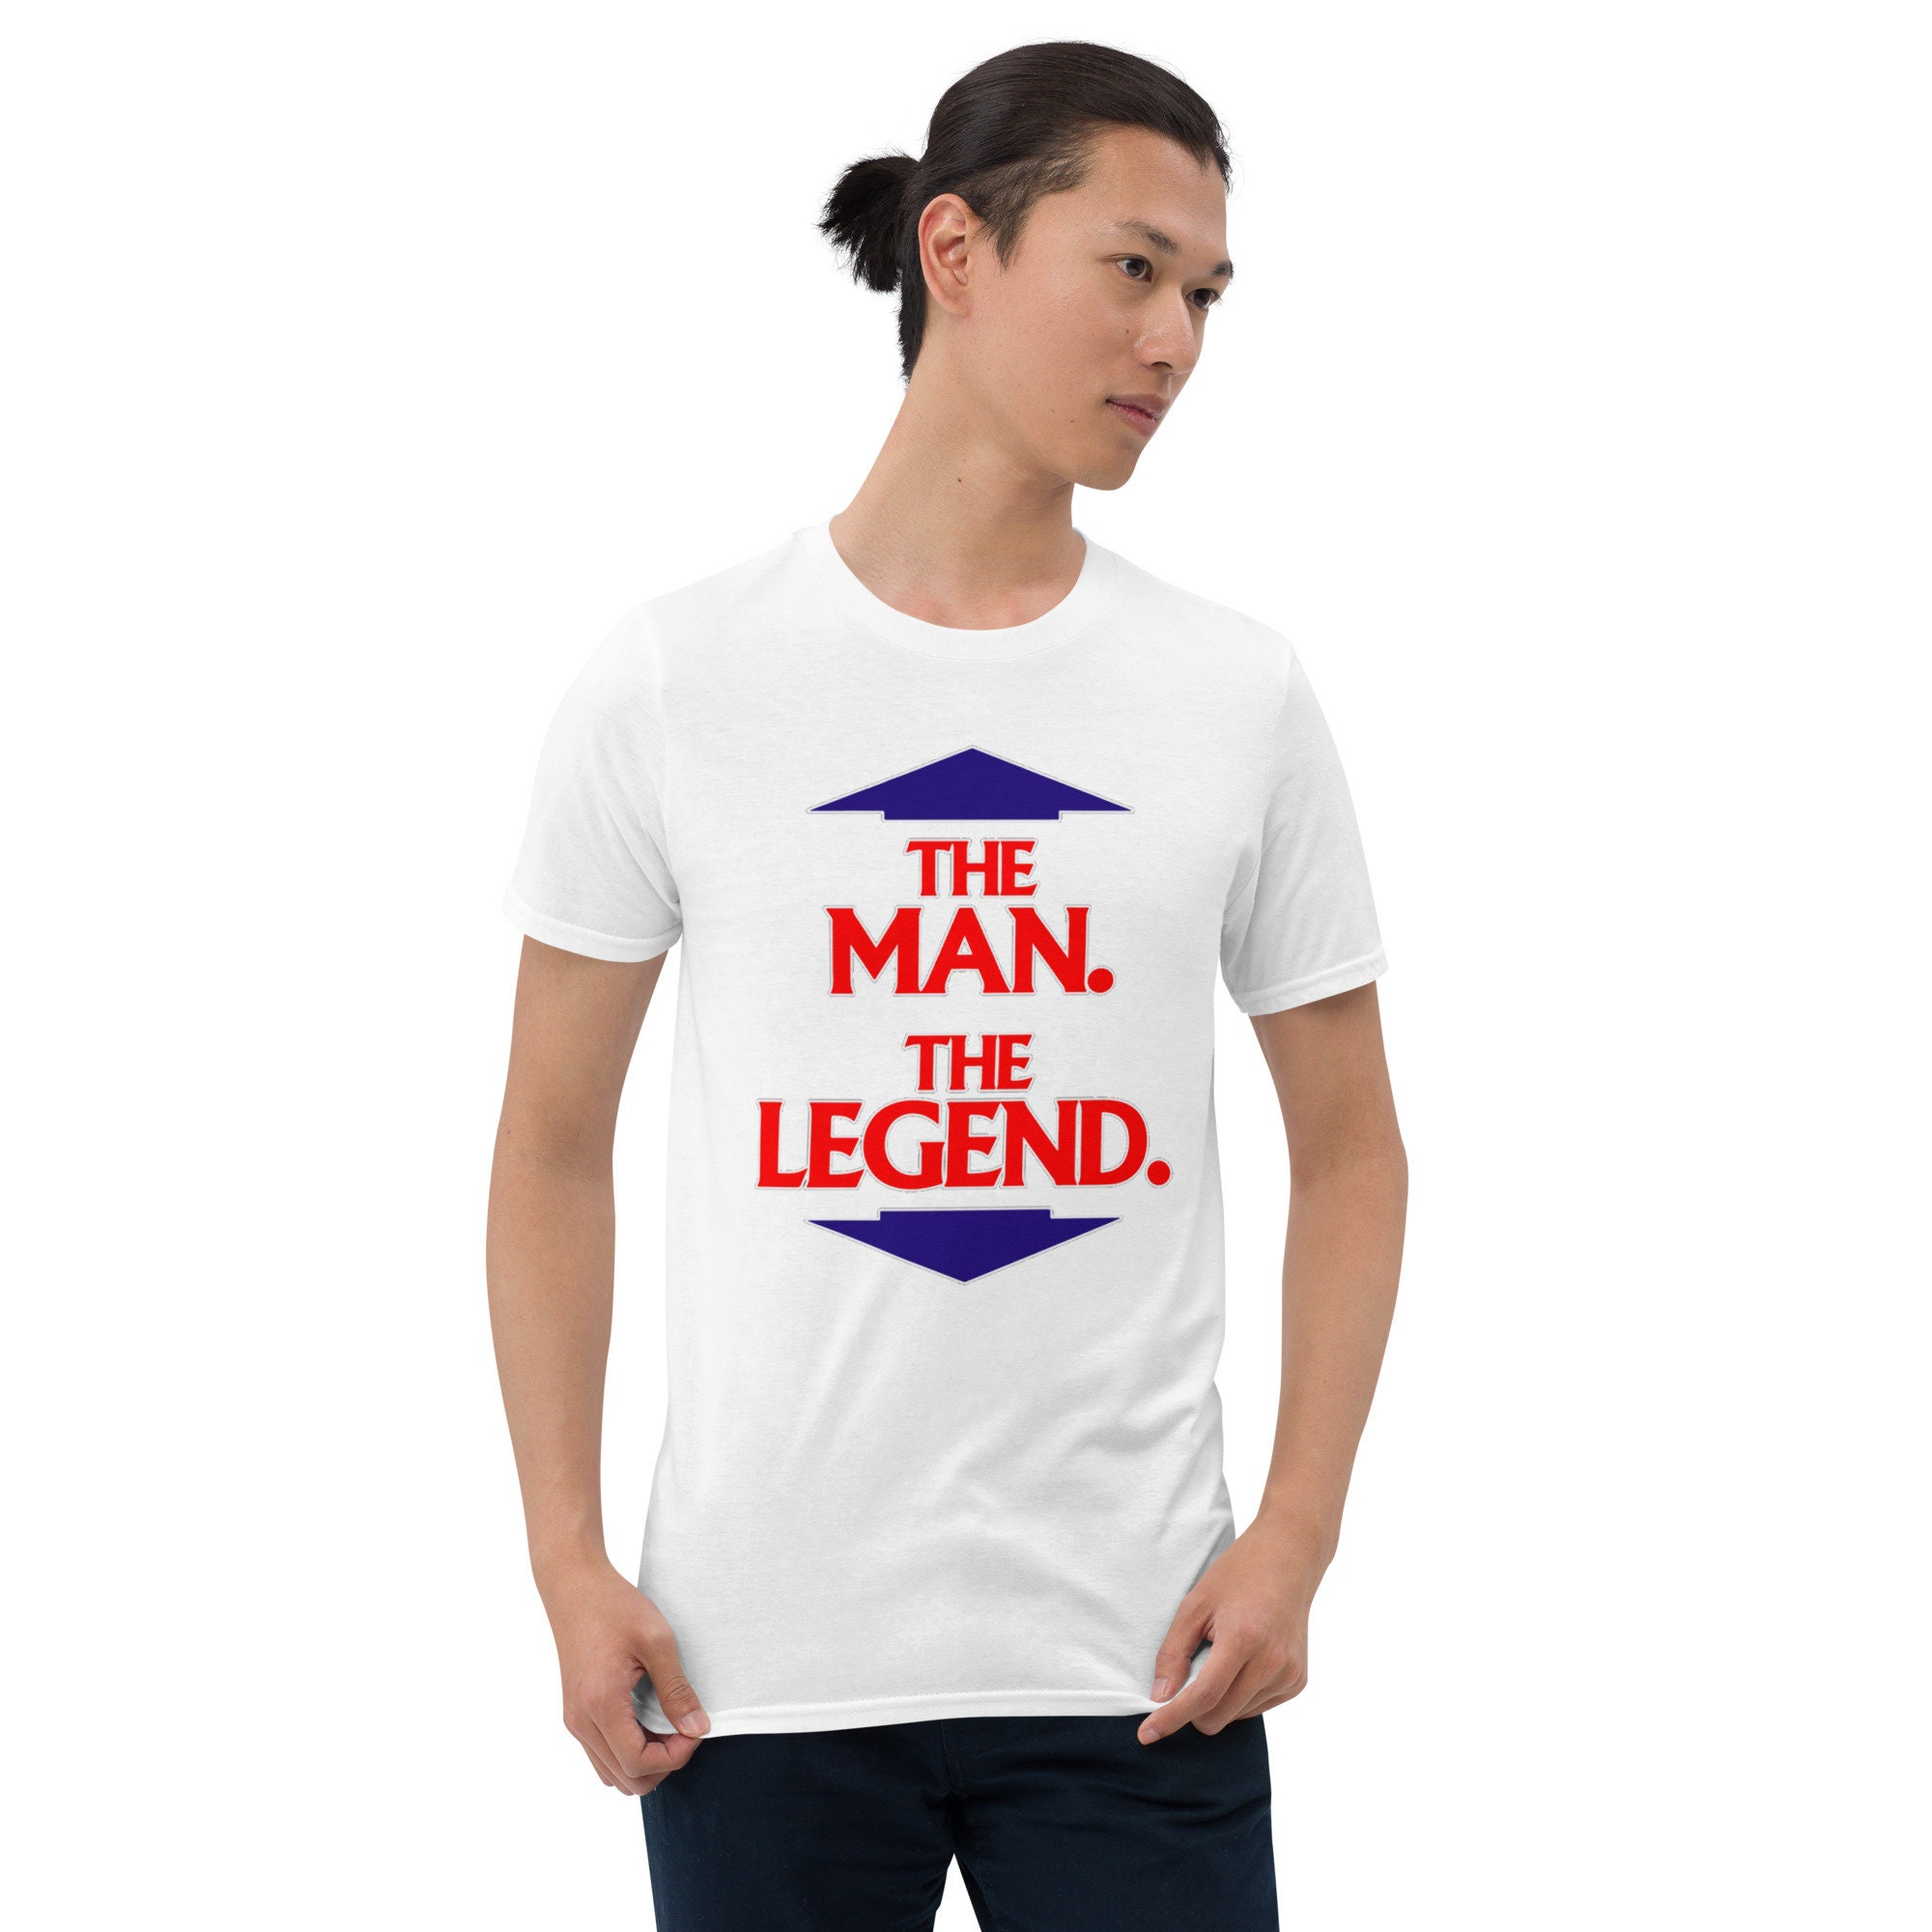 The Man, The Legend Funny T-shirt India